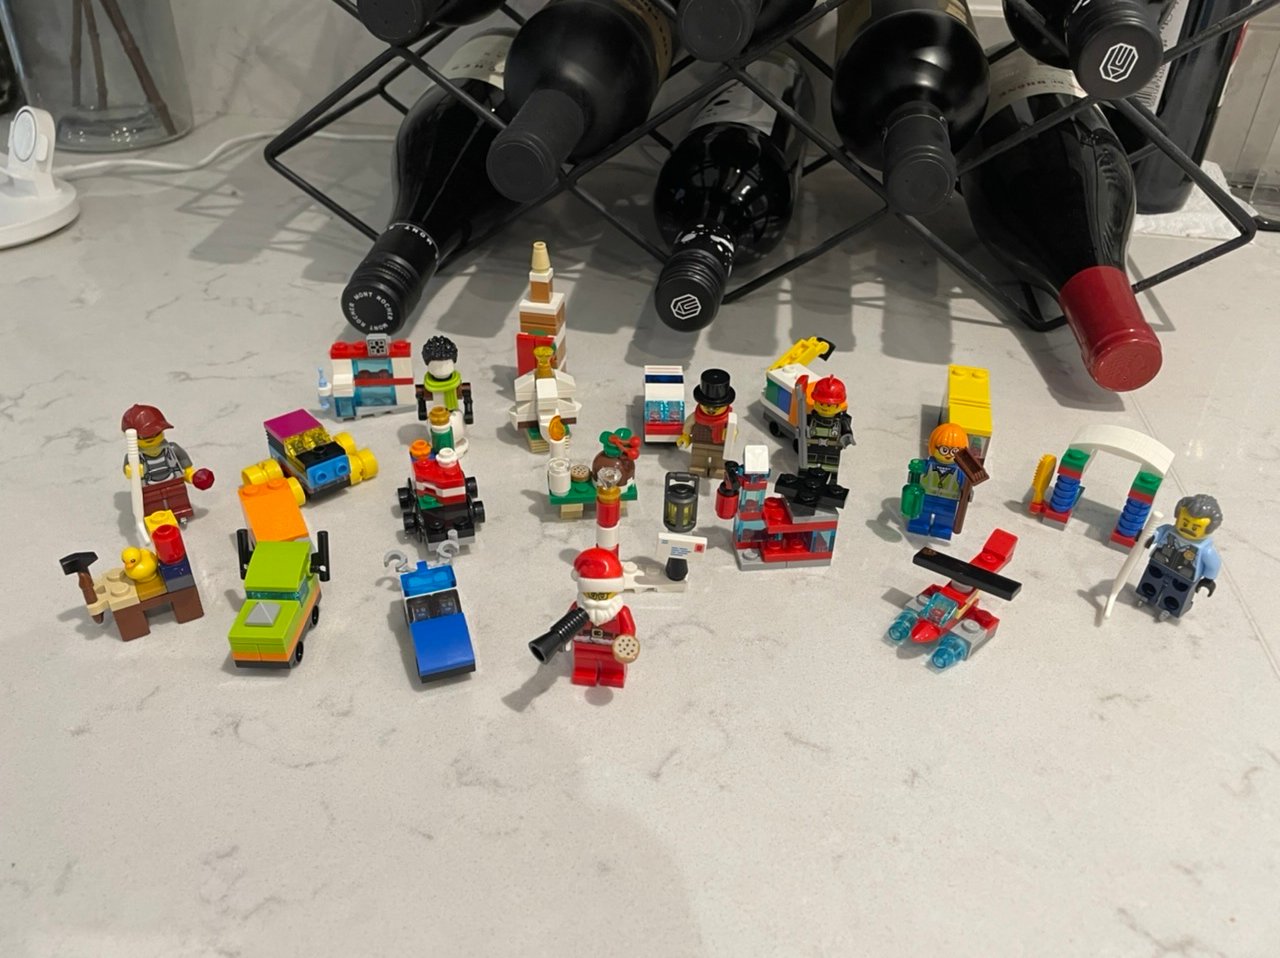 completed LEGO set with 24 different pieces, ranging from people to vehicles, with Santa in the middle